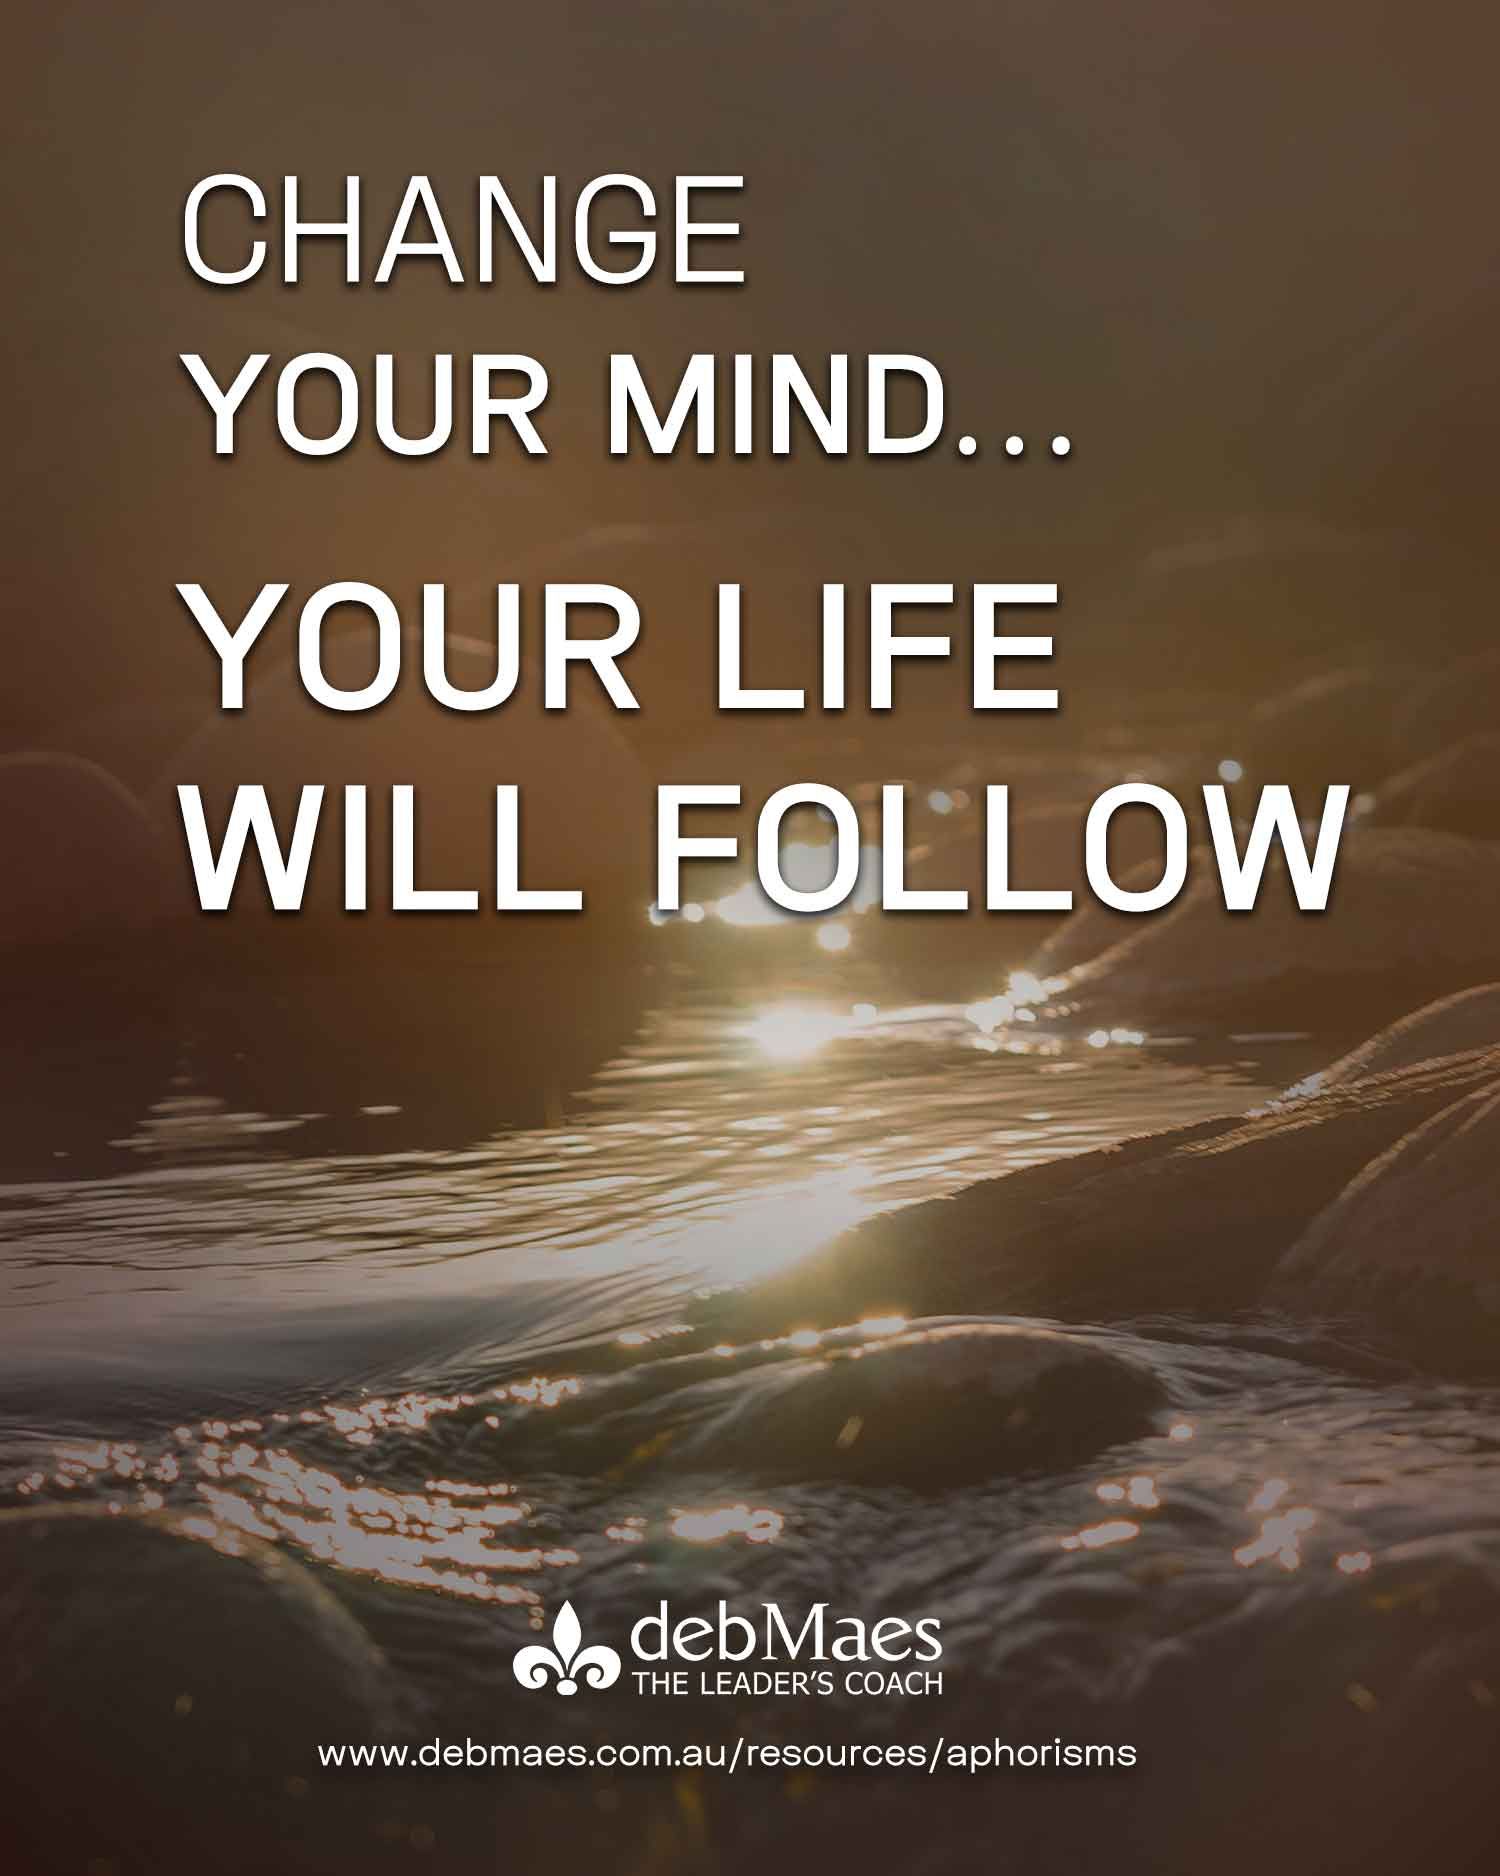 Change… your mind… your life will follow!